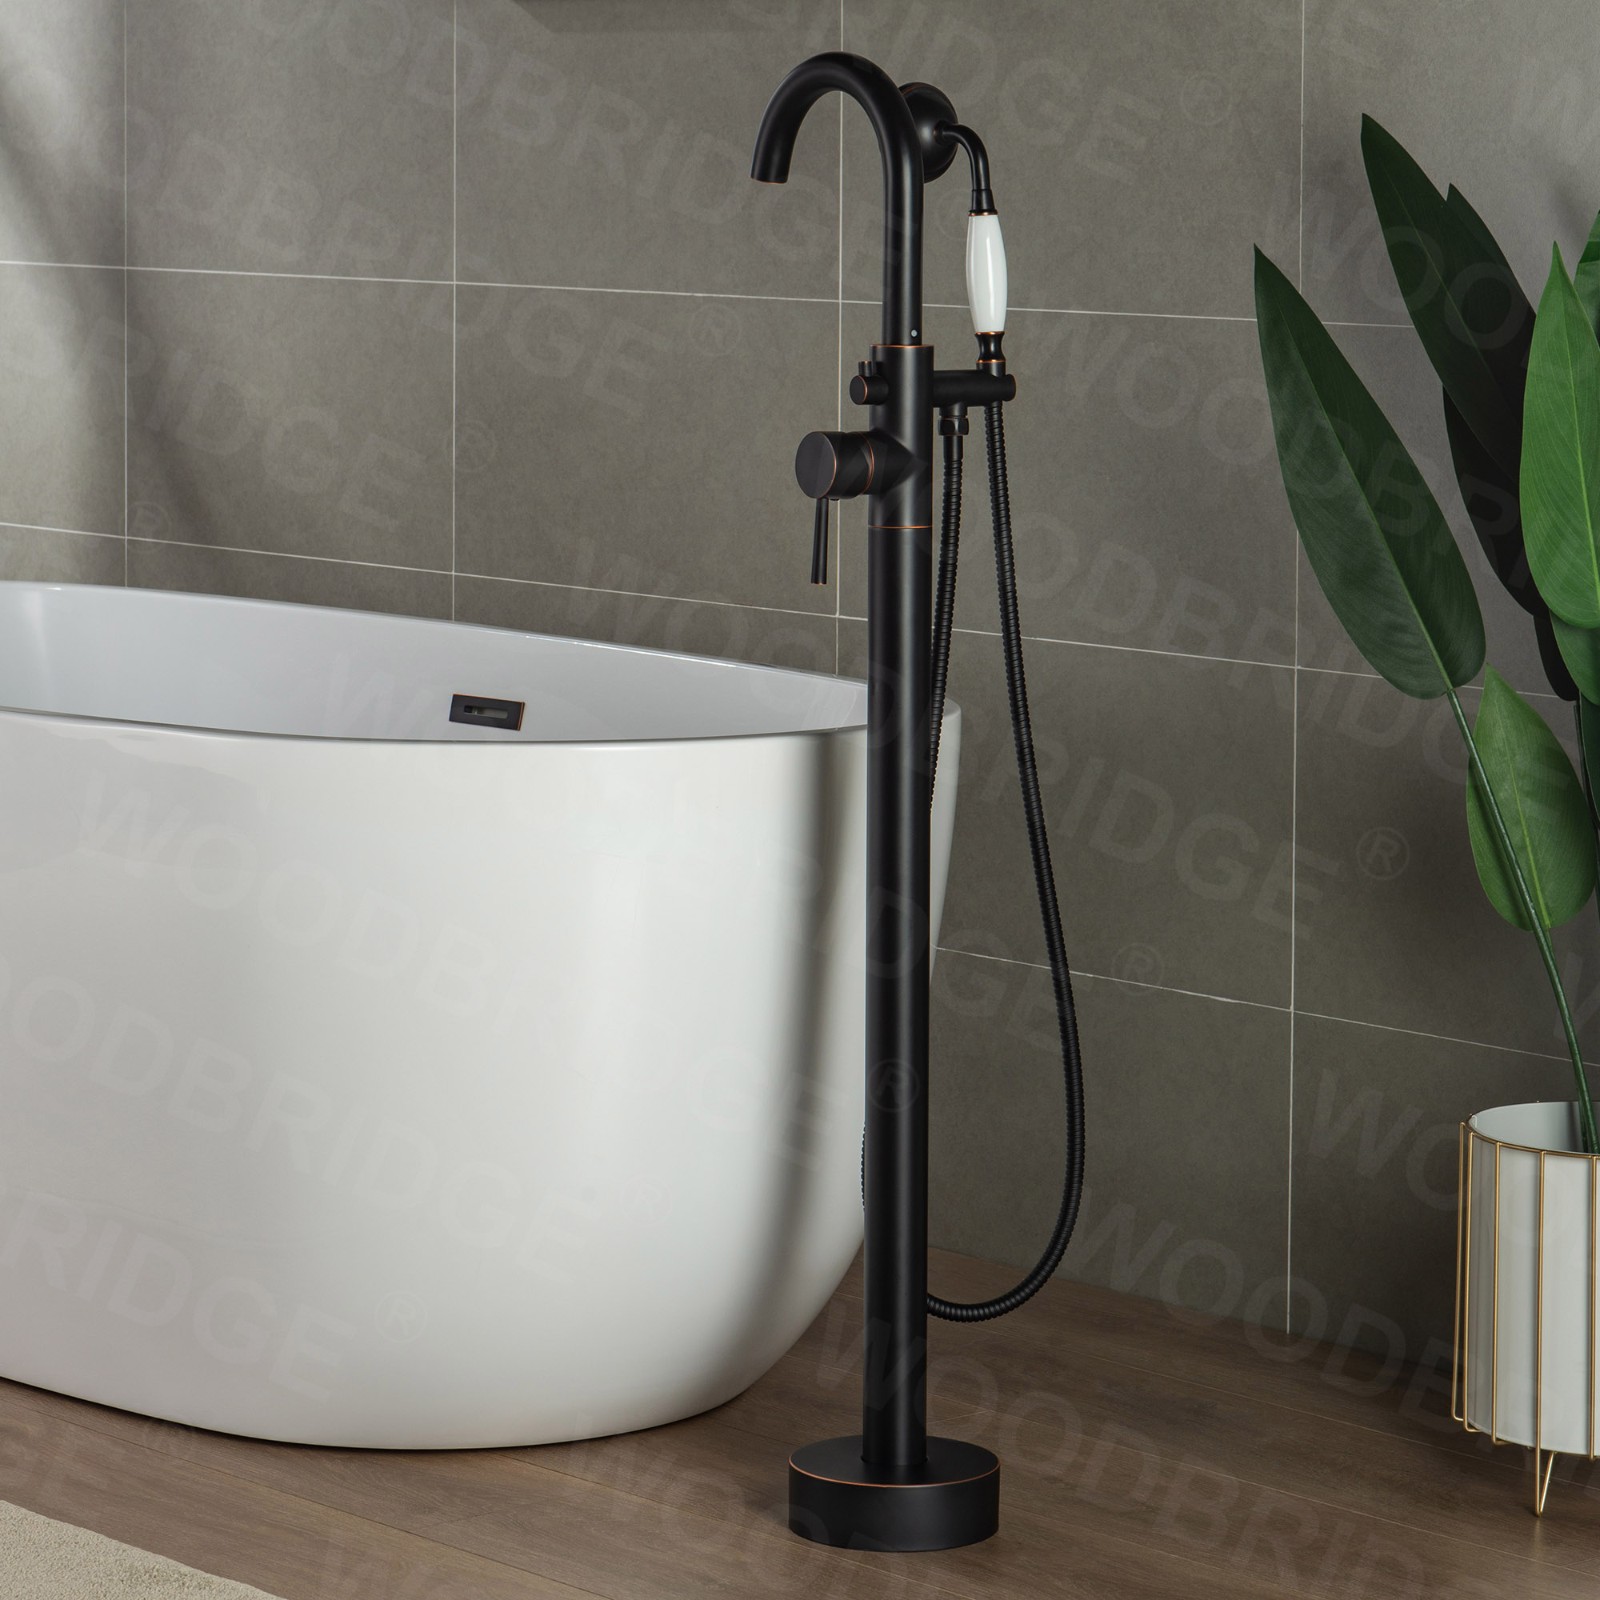  WOODBRIDGE Contemporary Single Handle Floor Mount Freestanding Tub Filler Faucet with Hand Shower in (Oil Rubbed Bronze) Finish,F0010ORBVT_6045